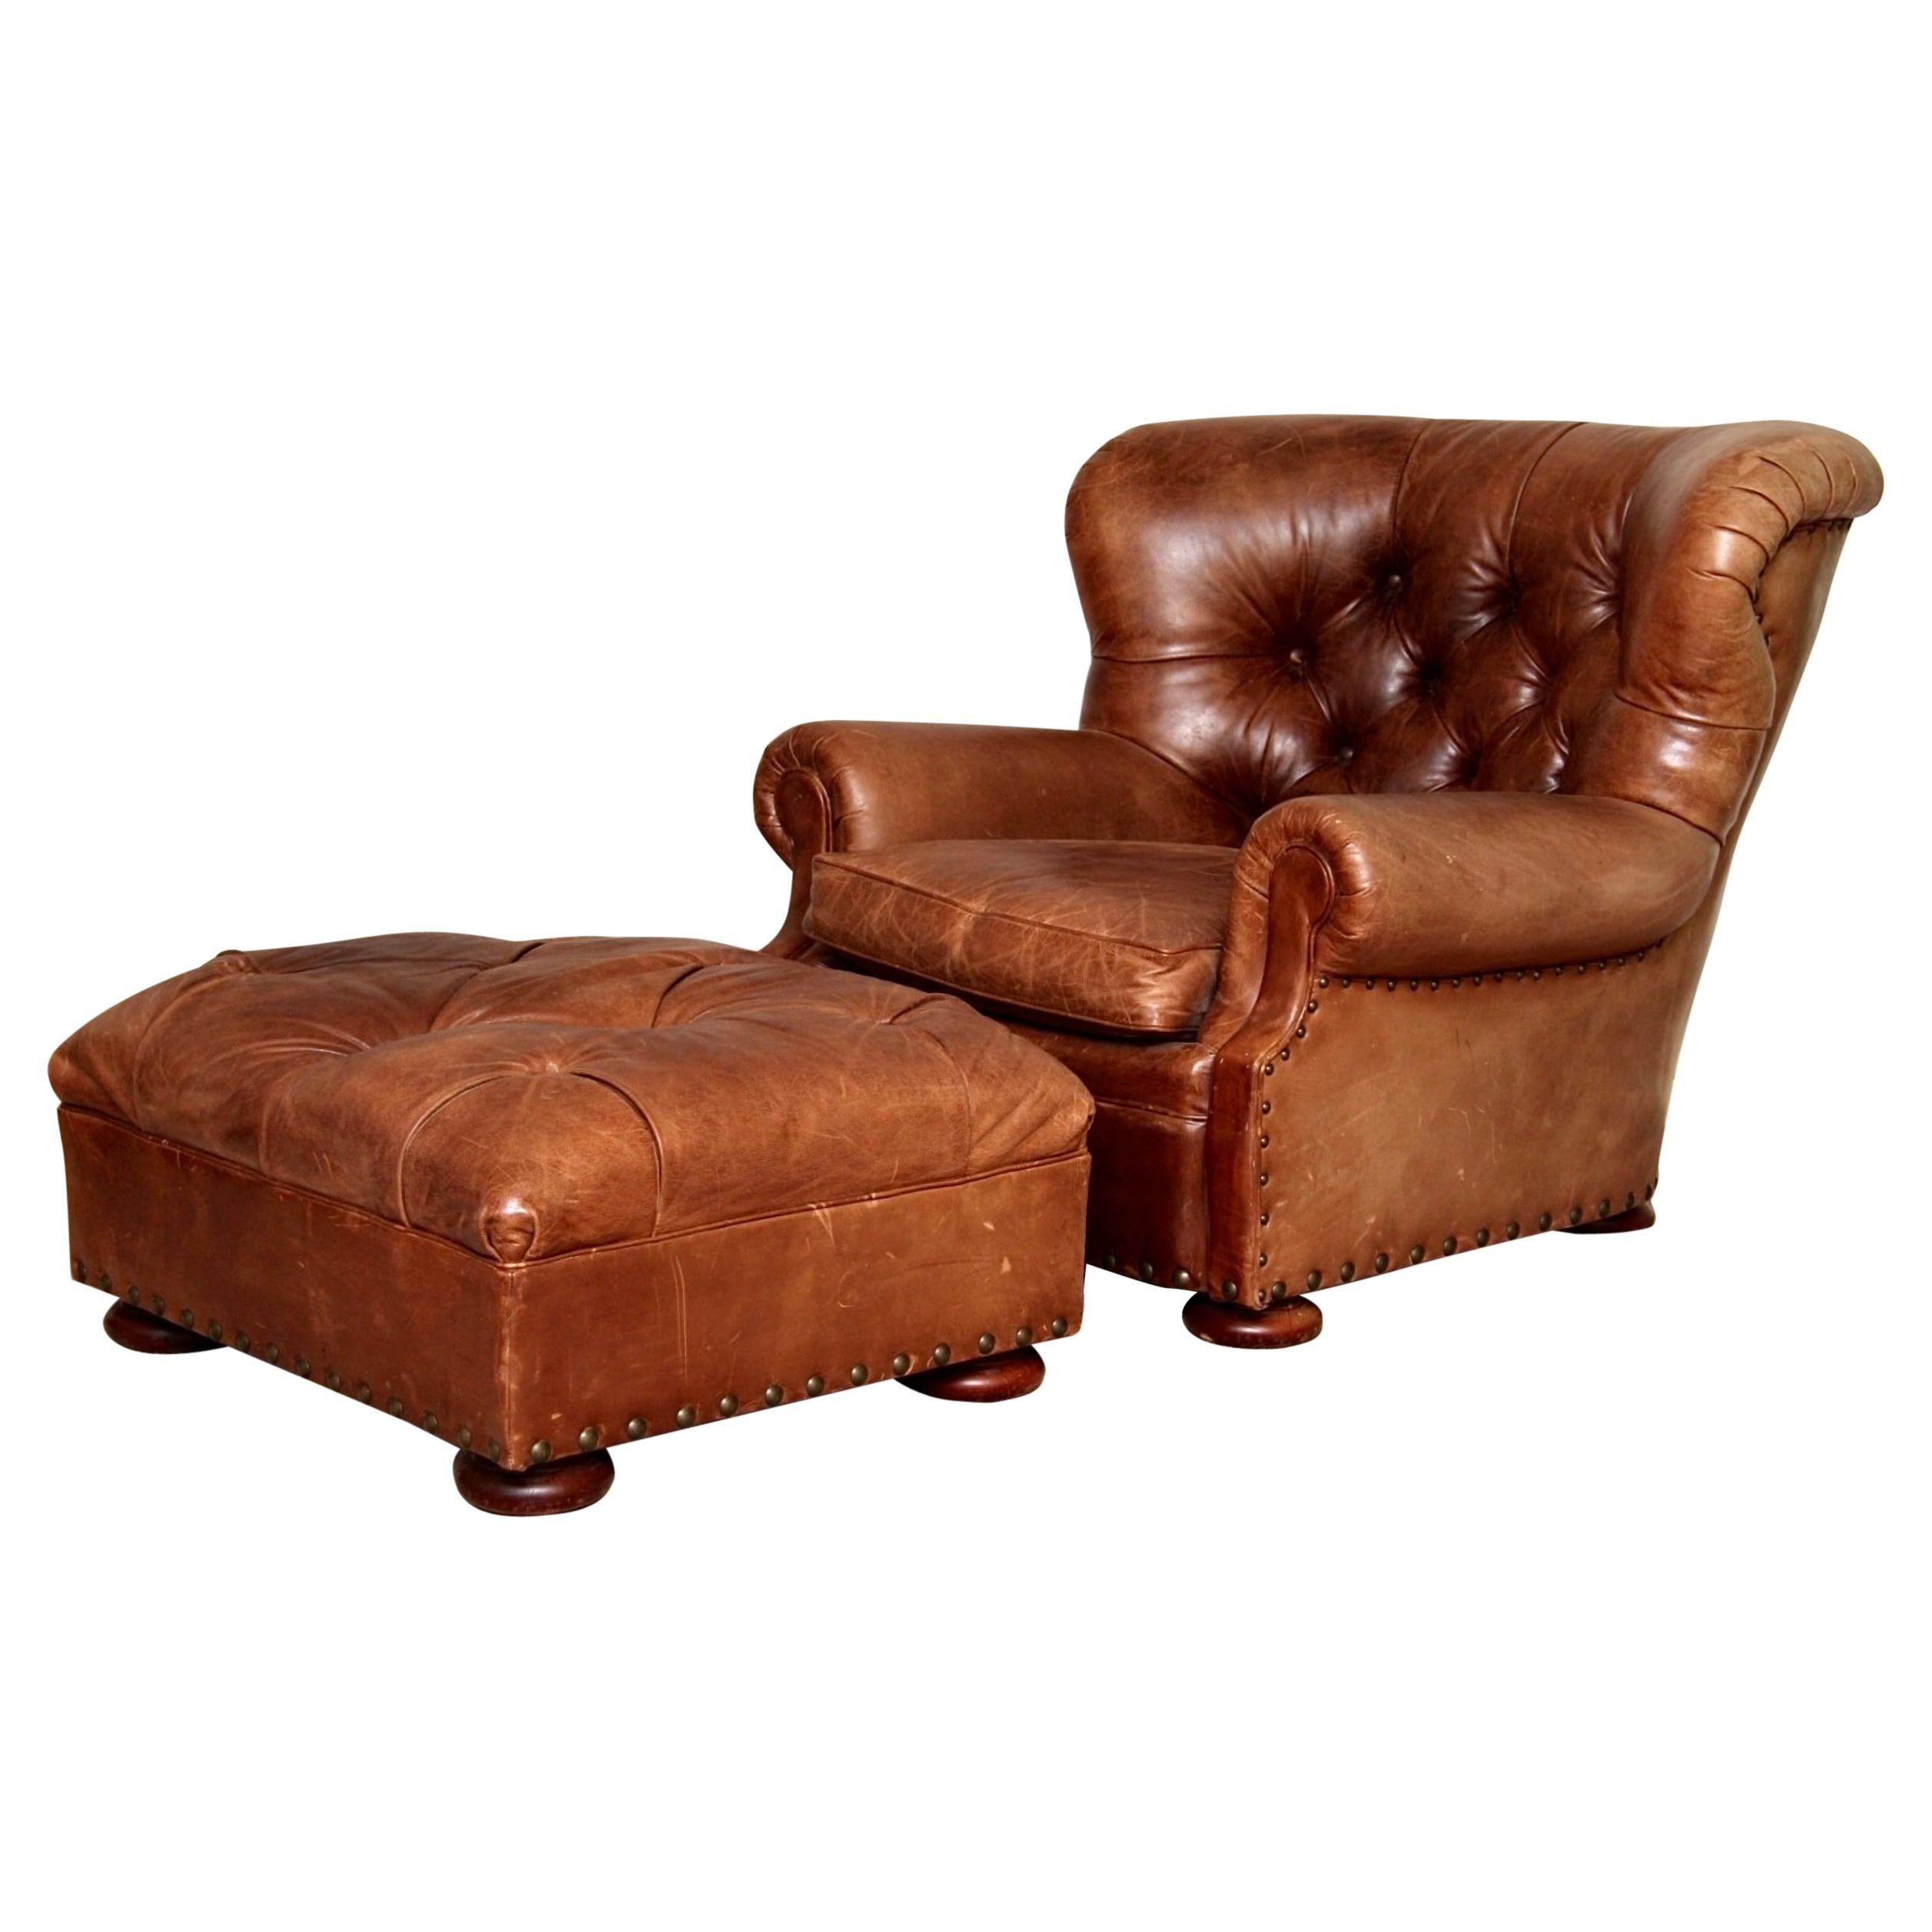 Henredon Brown Leather Writer's Lounge and Ottoman, Armchair, Iconic Club Chair